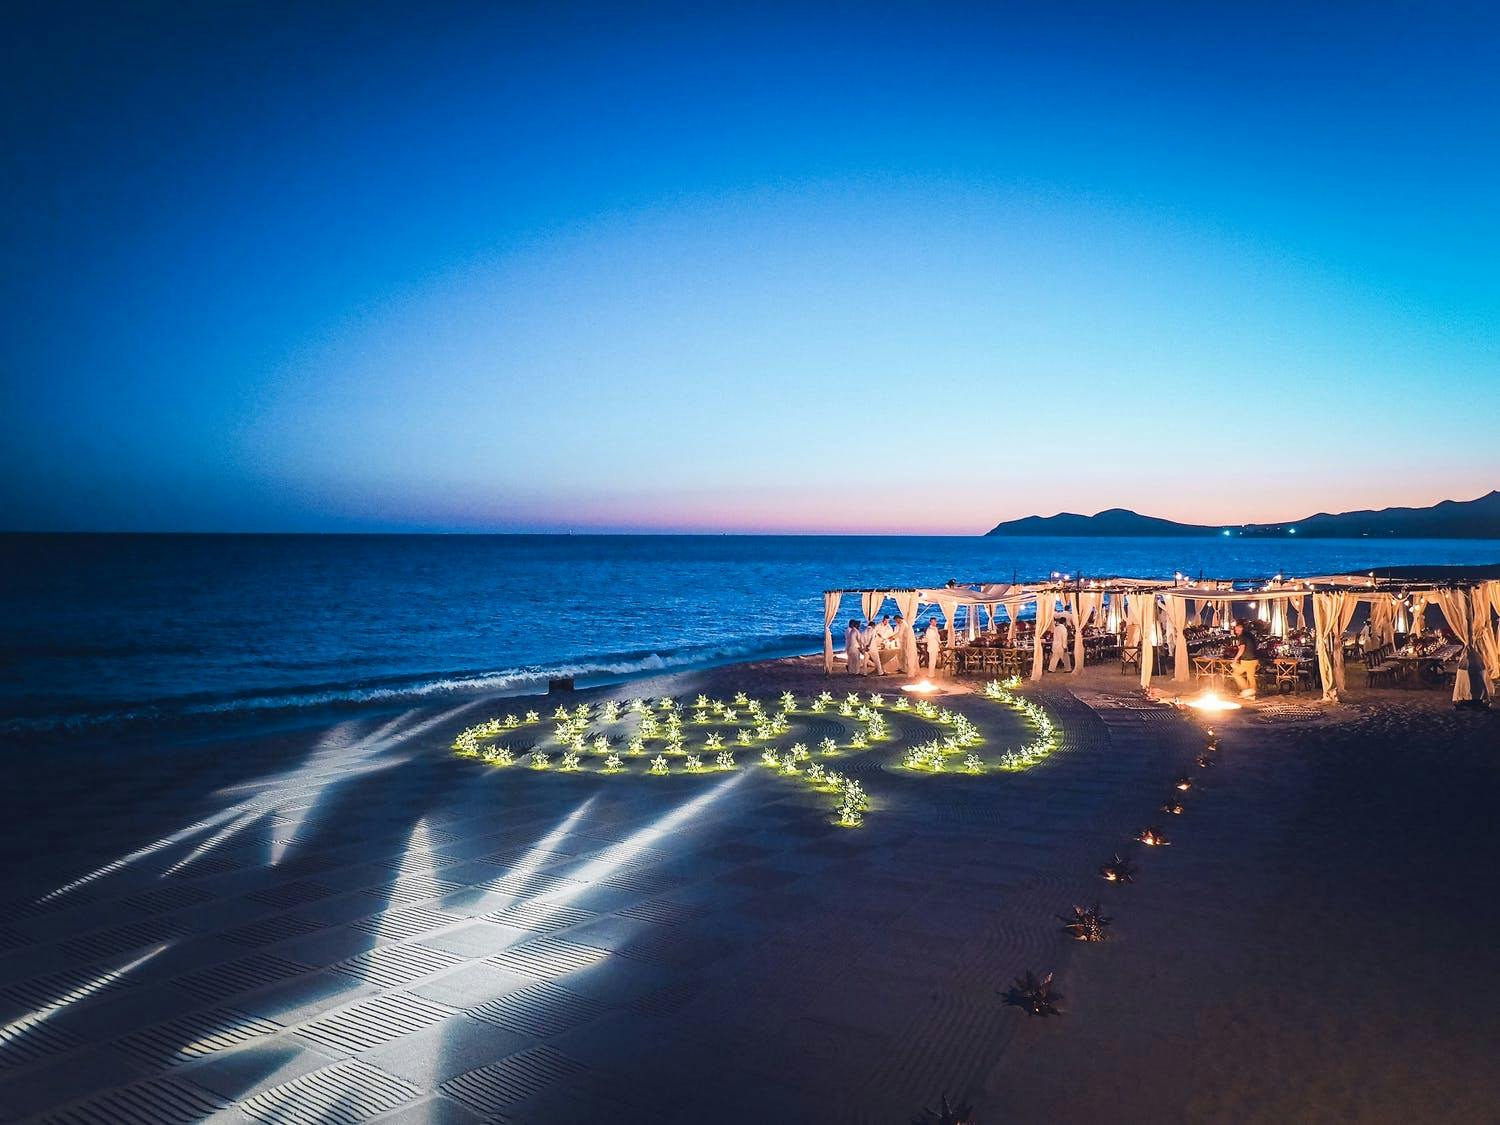 Beach Wedding With Star-Shaped Light Projections and Spiral Maze of Gold Star-Shaped Lanterns | PartySlate